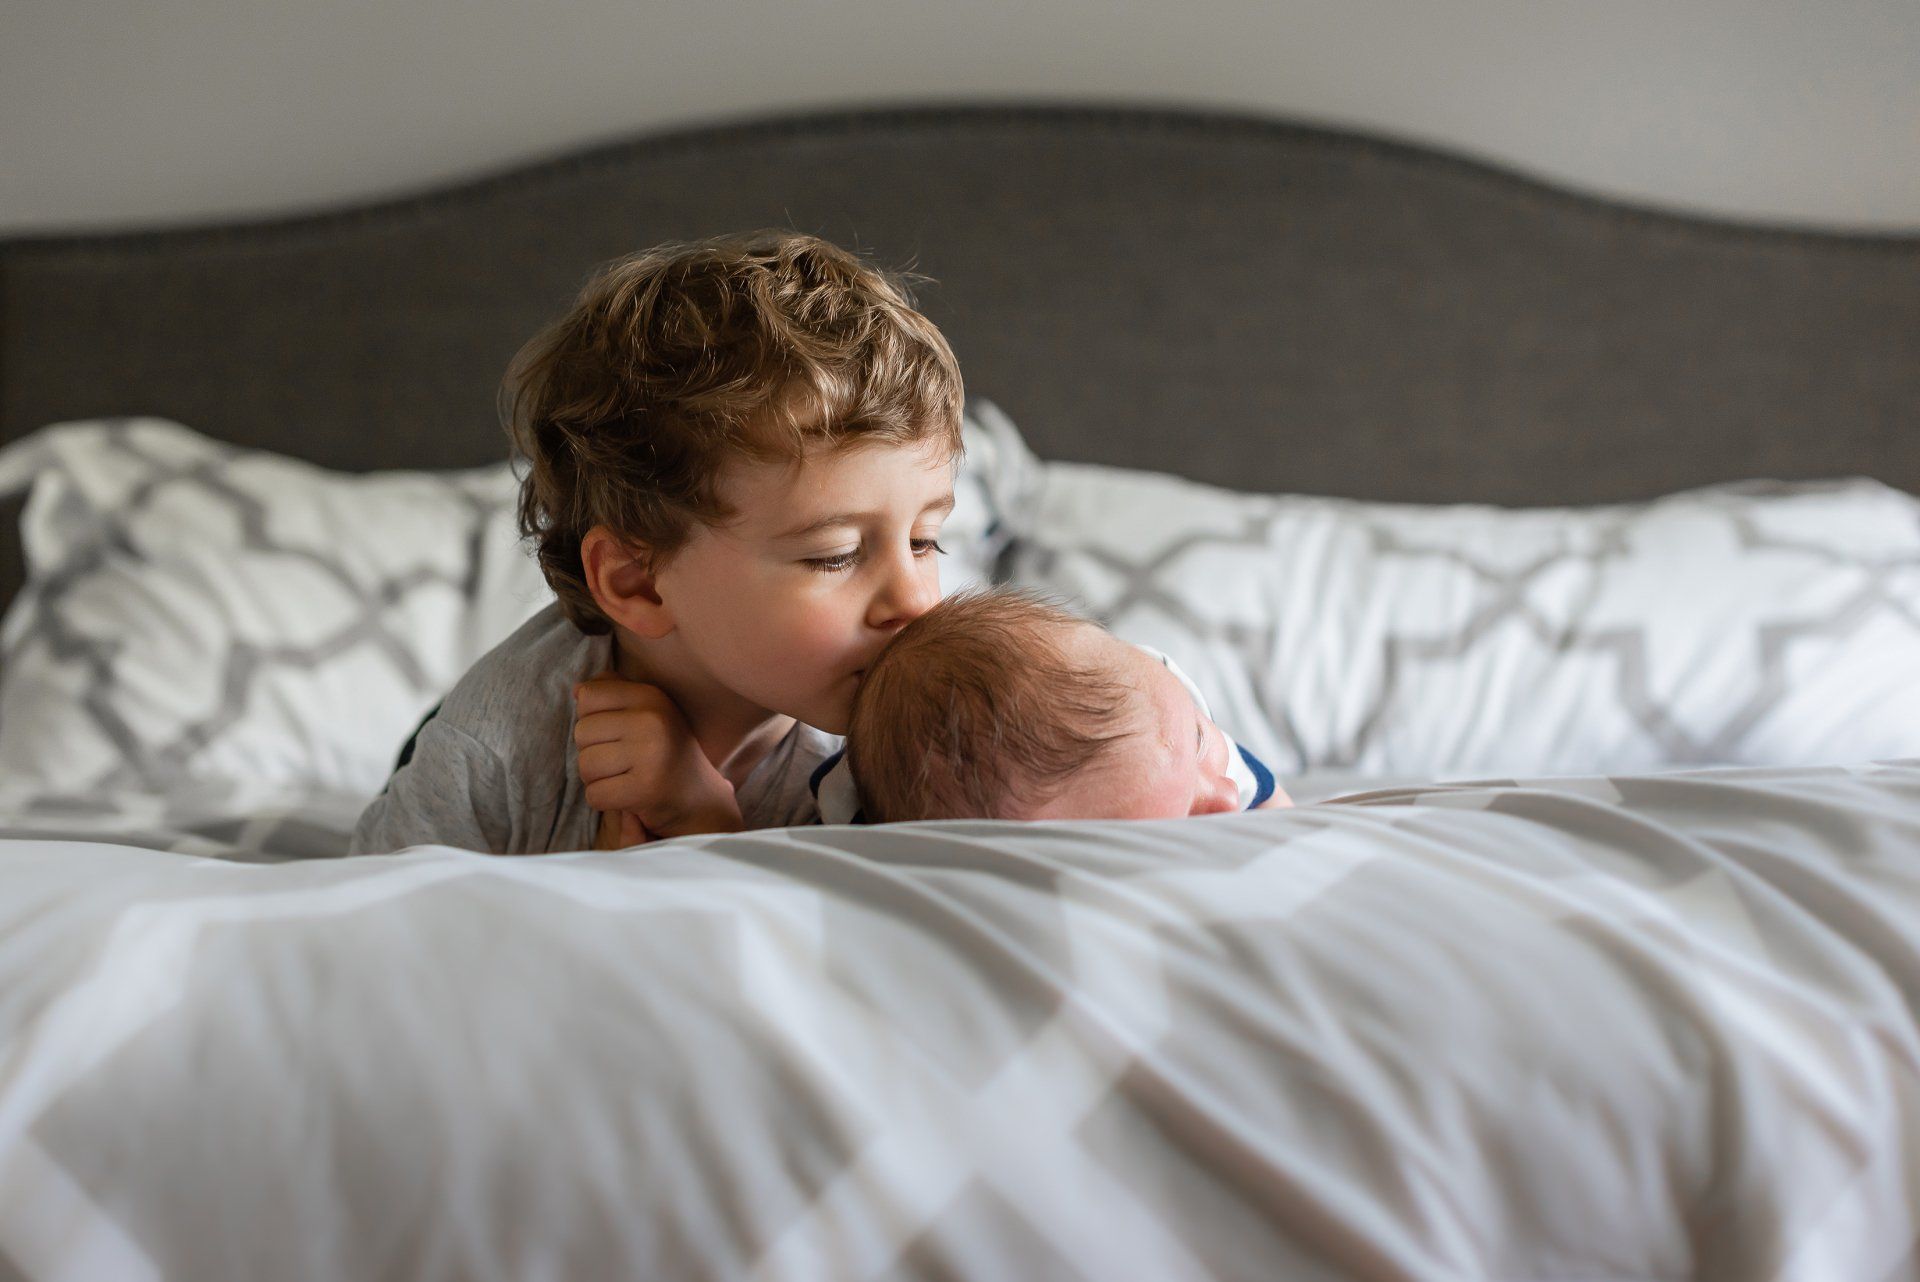 Family photographer Toronto | Stacey Naglie | Toddler kissing newborn on back of head while lounging on bed